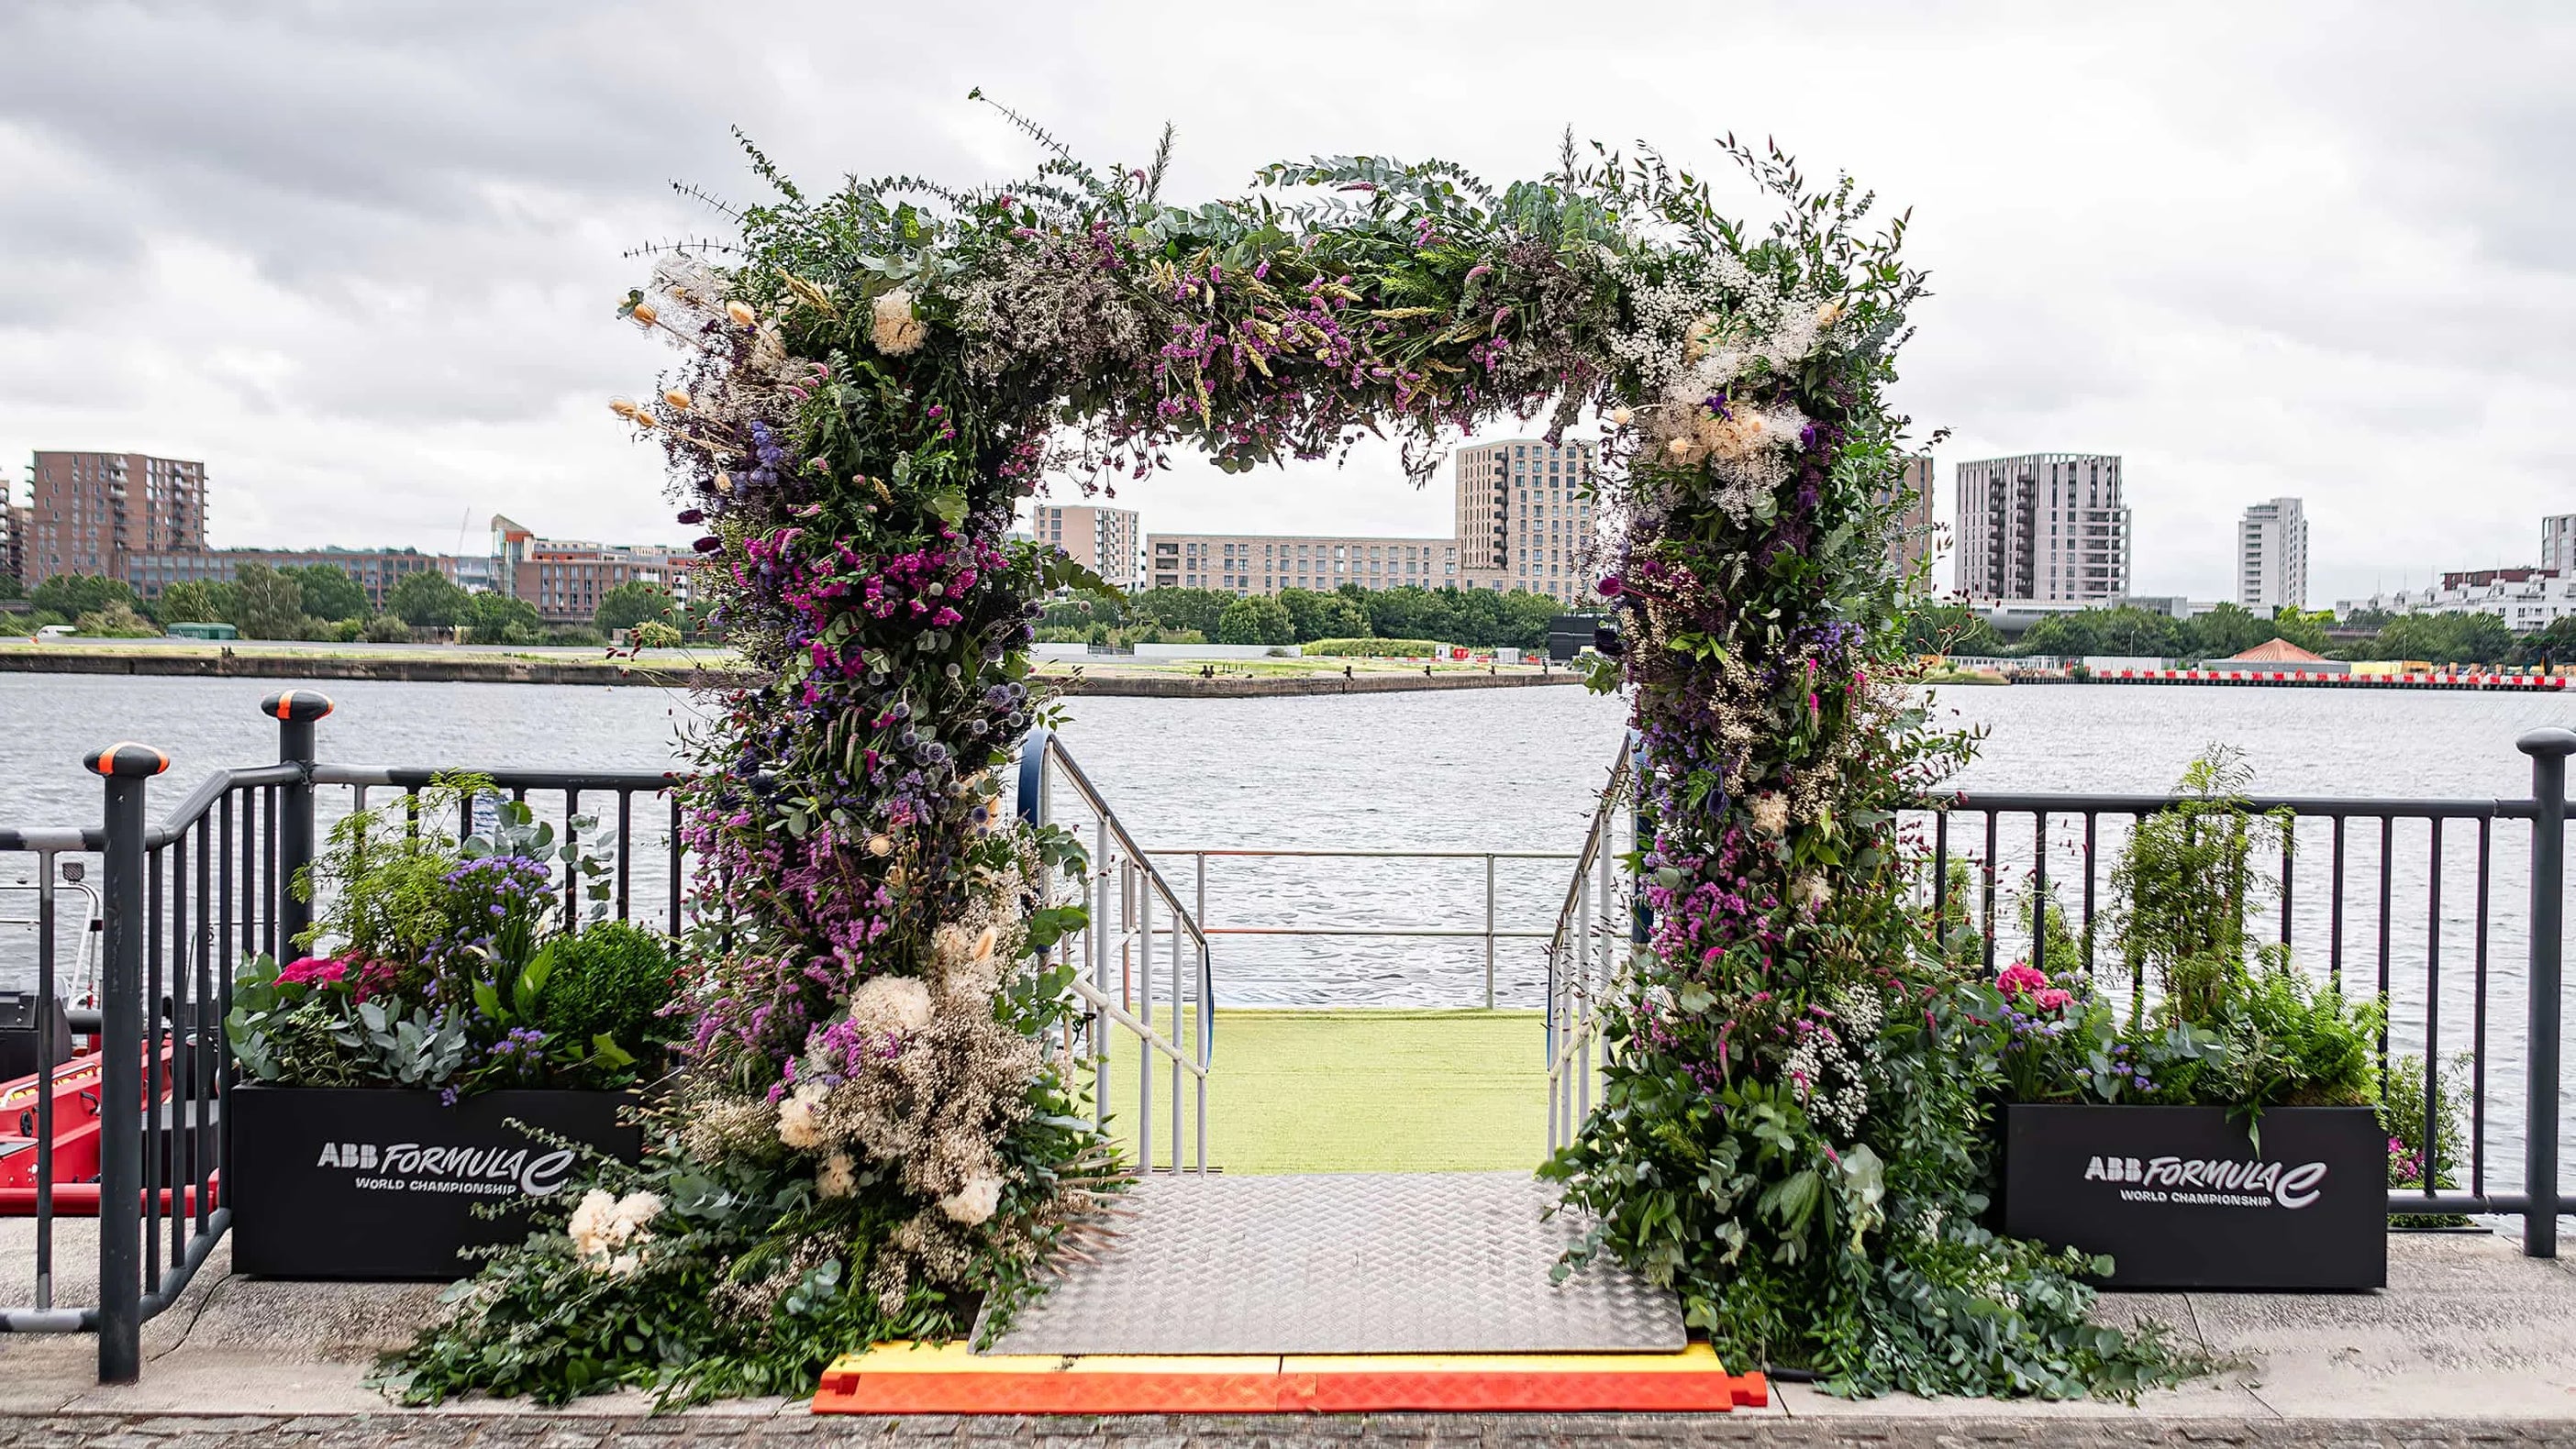 The majestic, floral archway at the ABB Formula E World Championship entrance, adorned with lush, vibrant flowers in purples, whites, and greens, overlooks the serene waters of the London docks, enhancing the event's grandeur and sustainability ethos - Amaranté London.